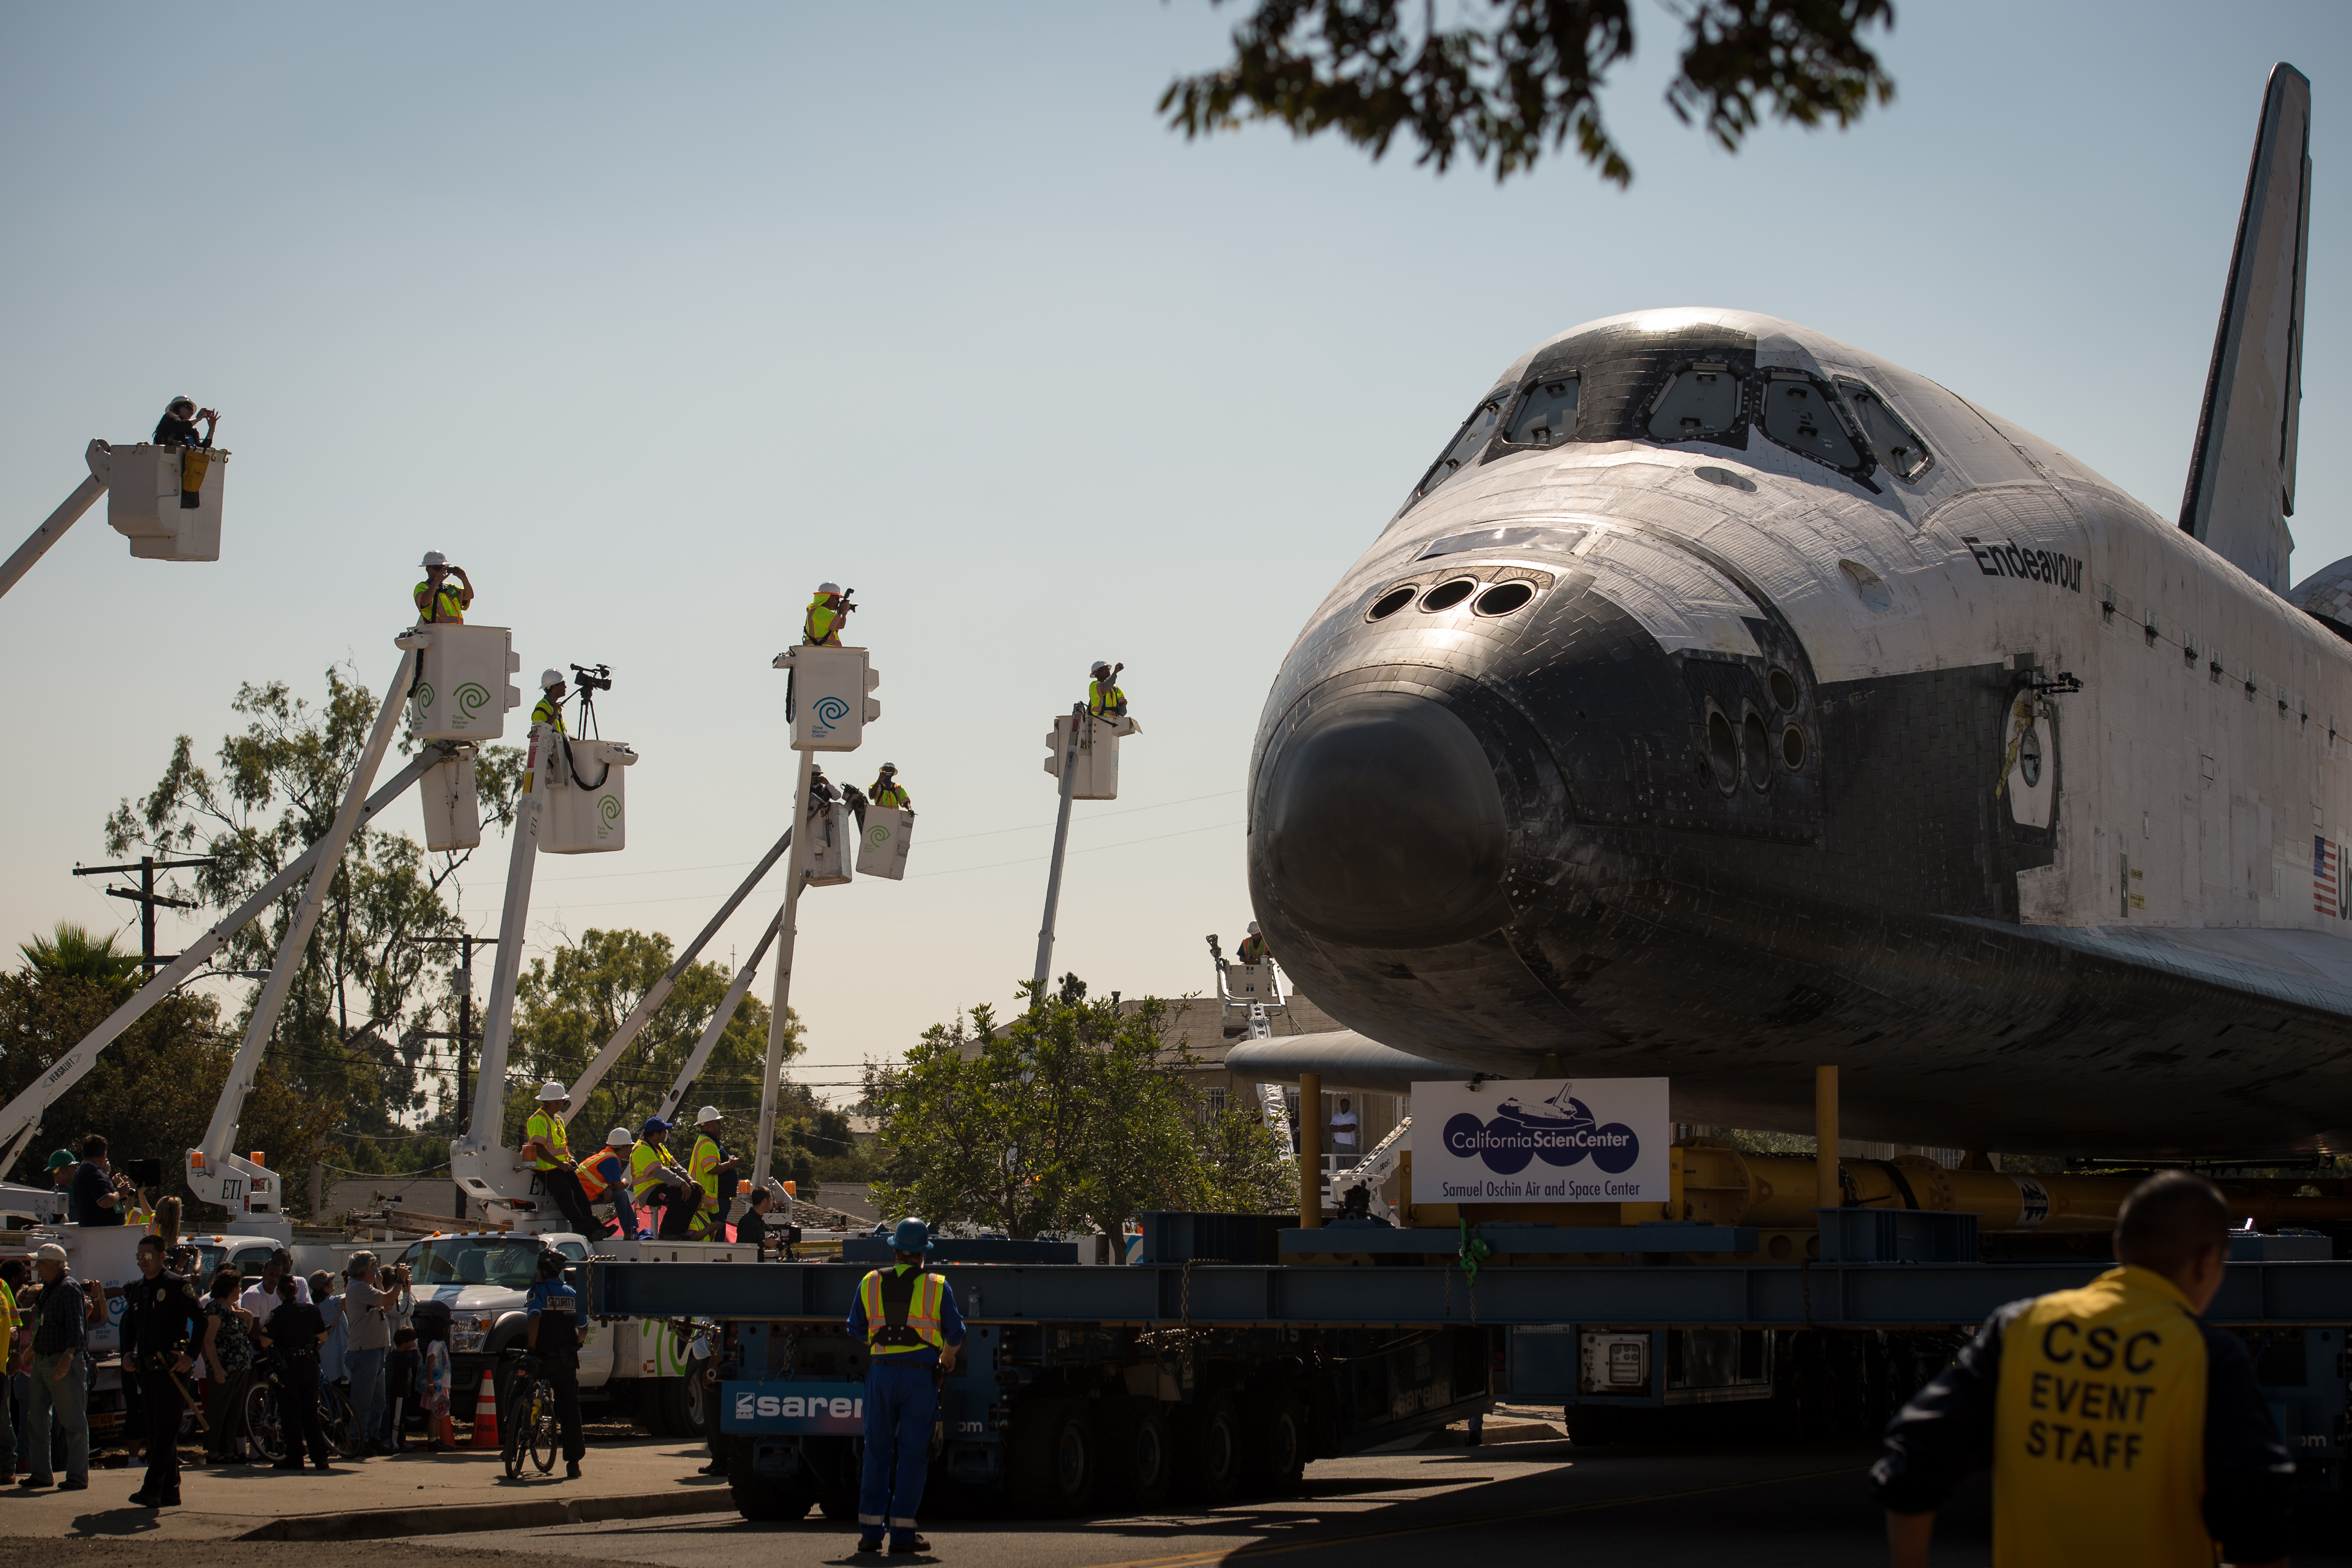 Endeavour on a Los Angeles street, with workers in lifts to get a better look at the scene